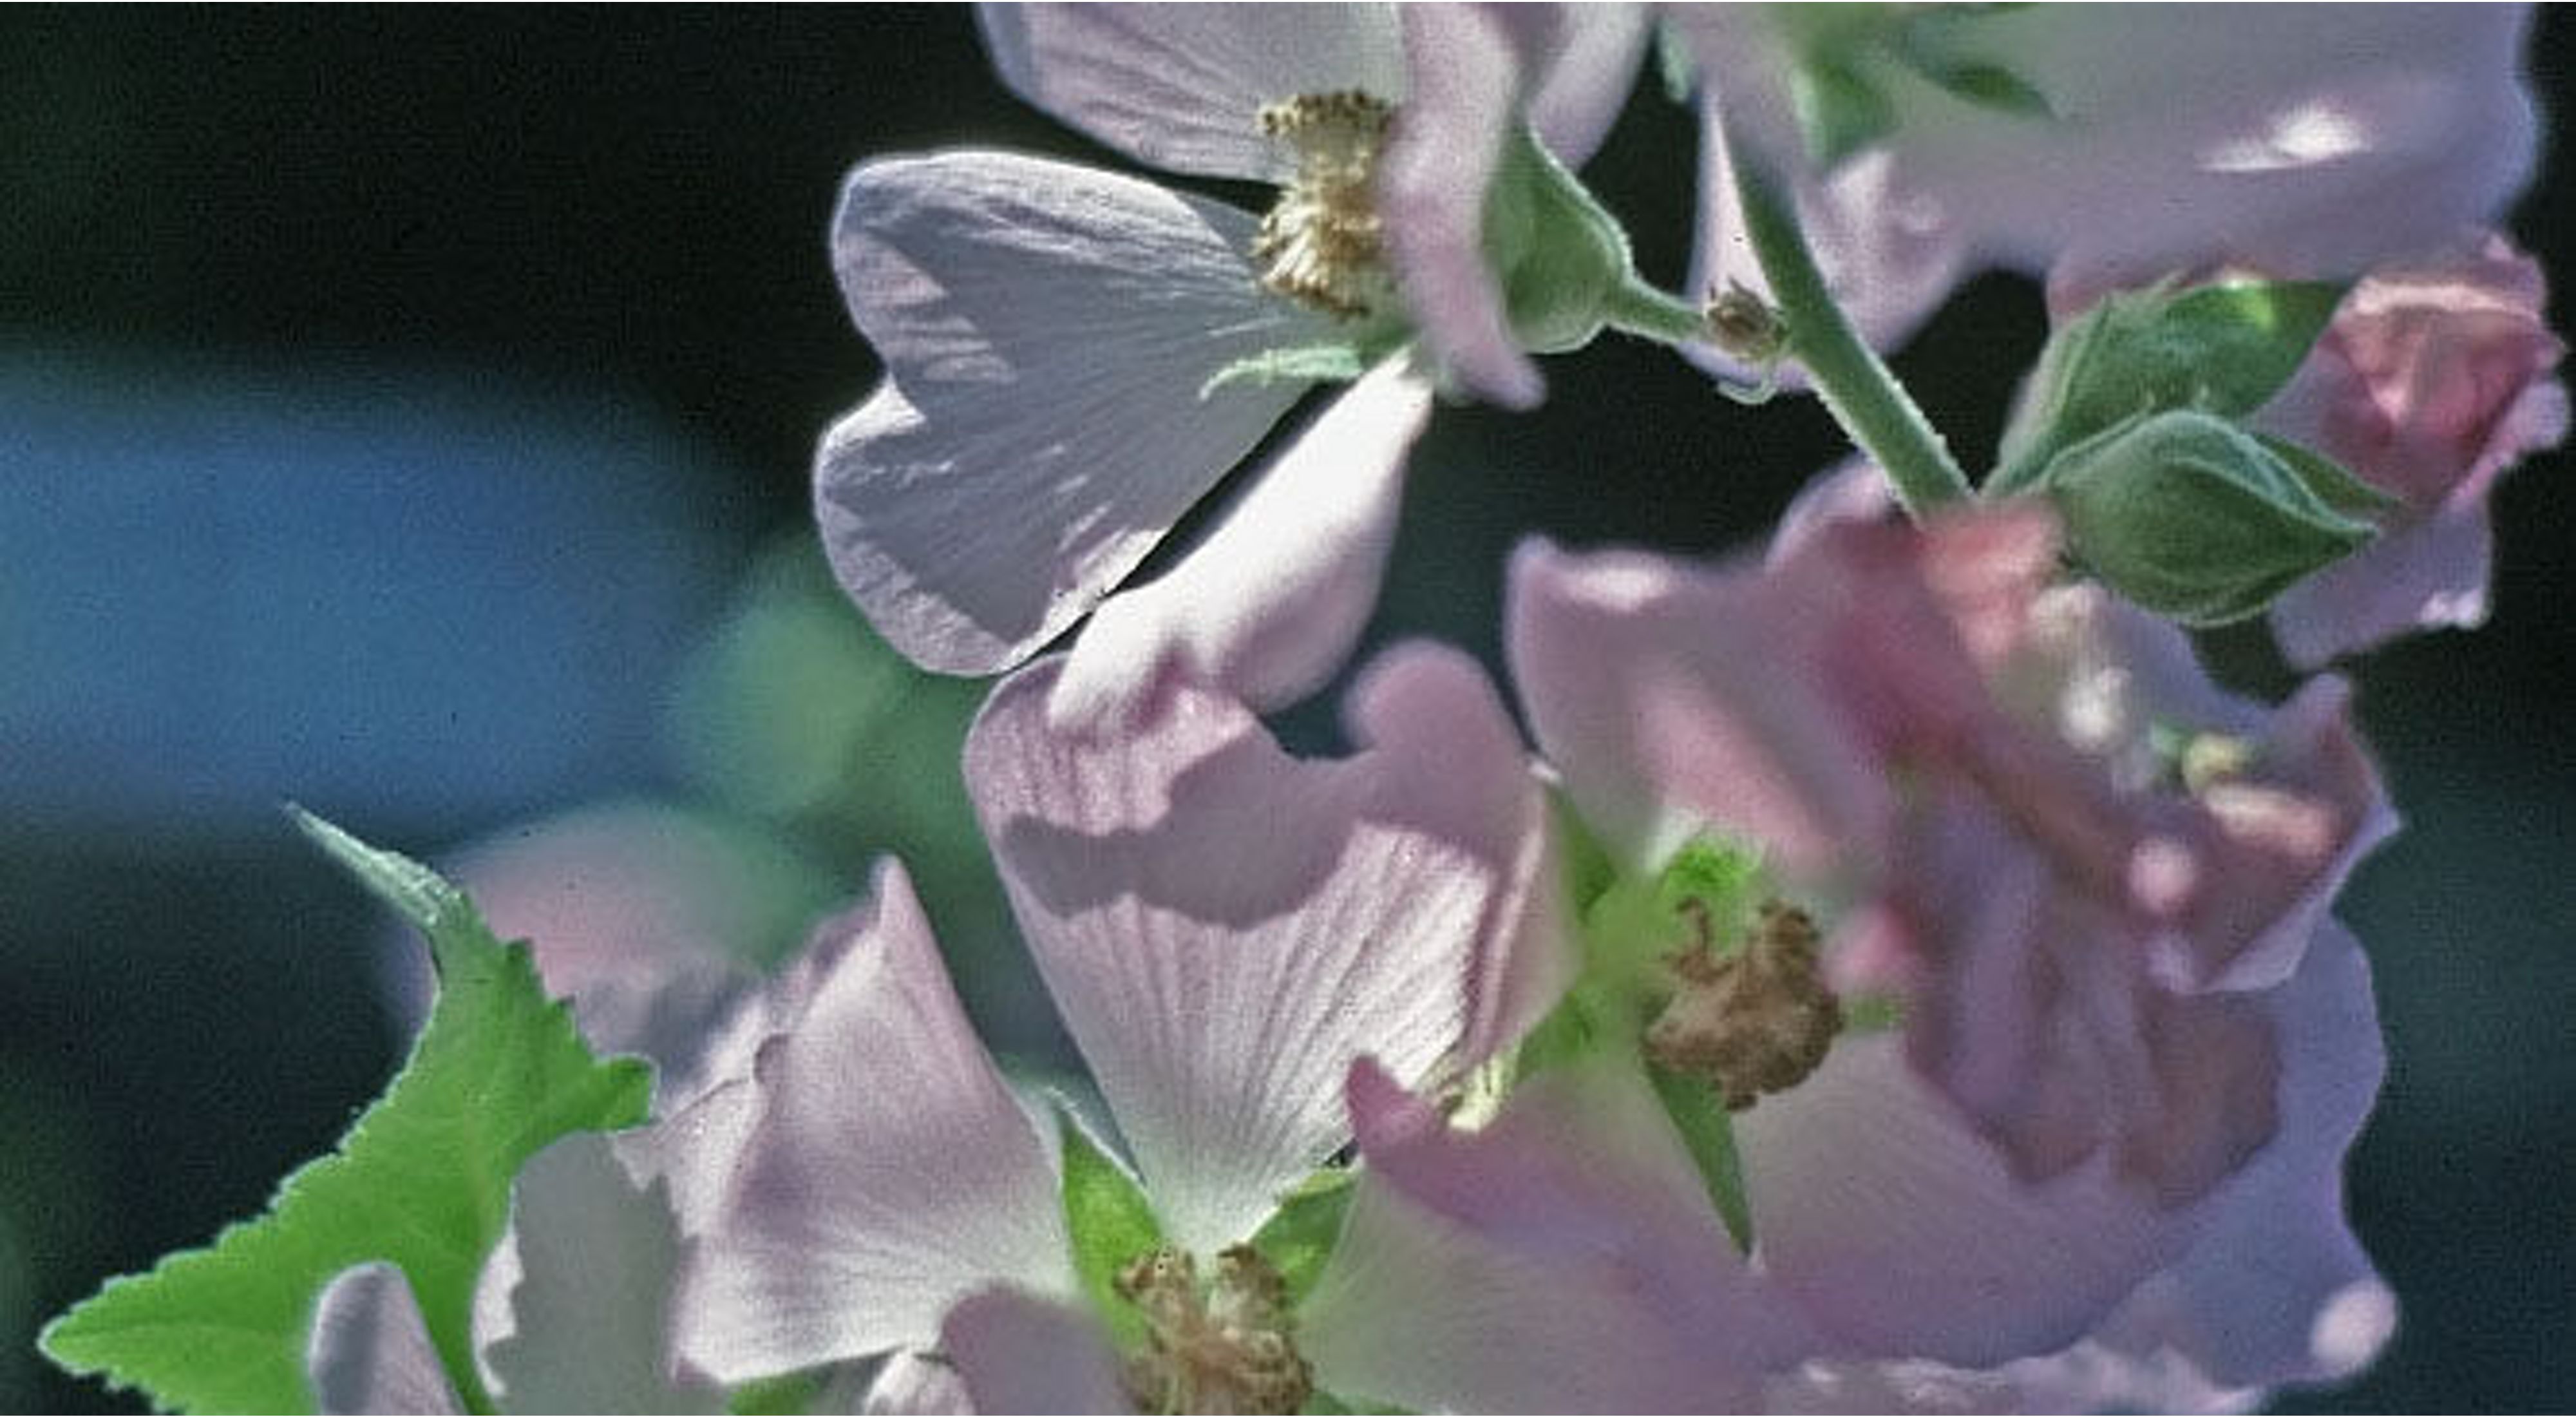 Peter's Mountain Mallow, a cluster of delicate, pinkish white blossoms.